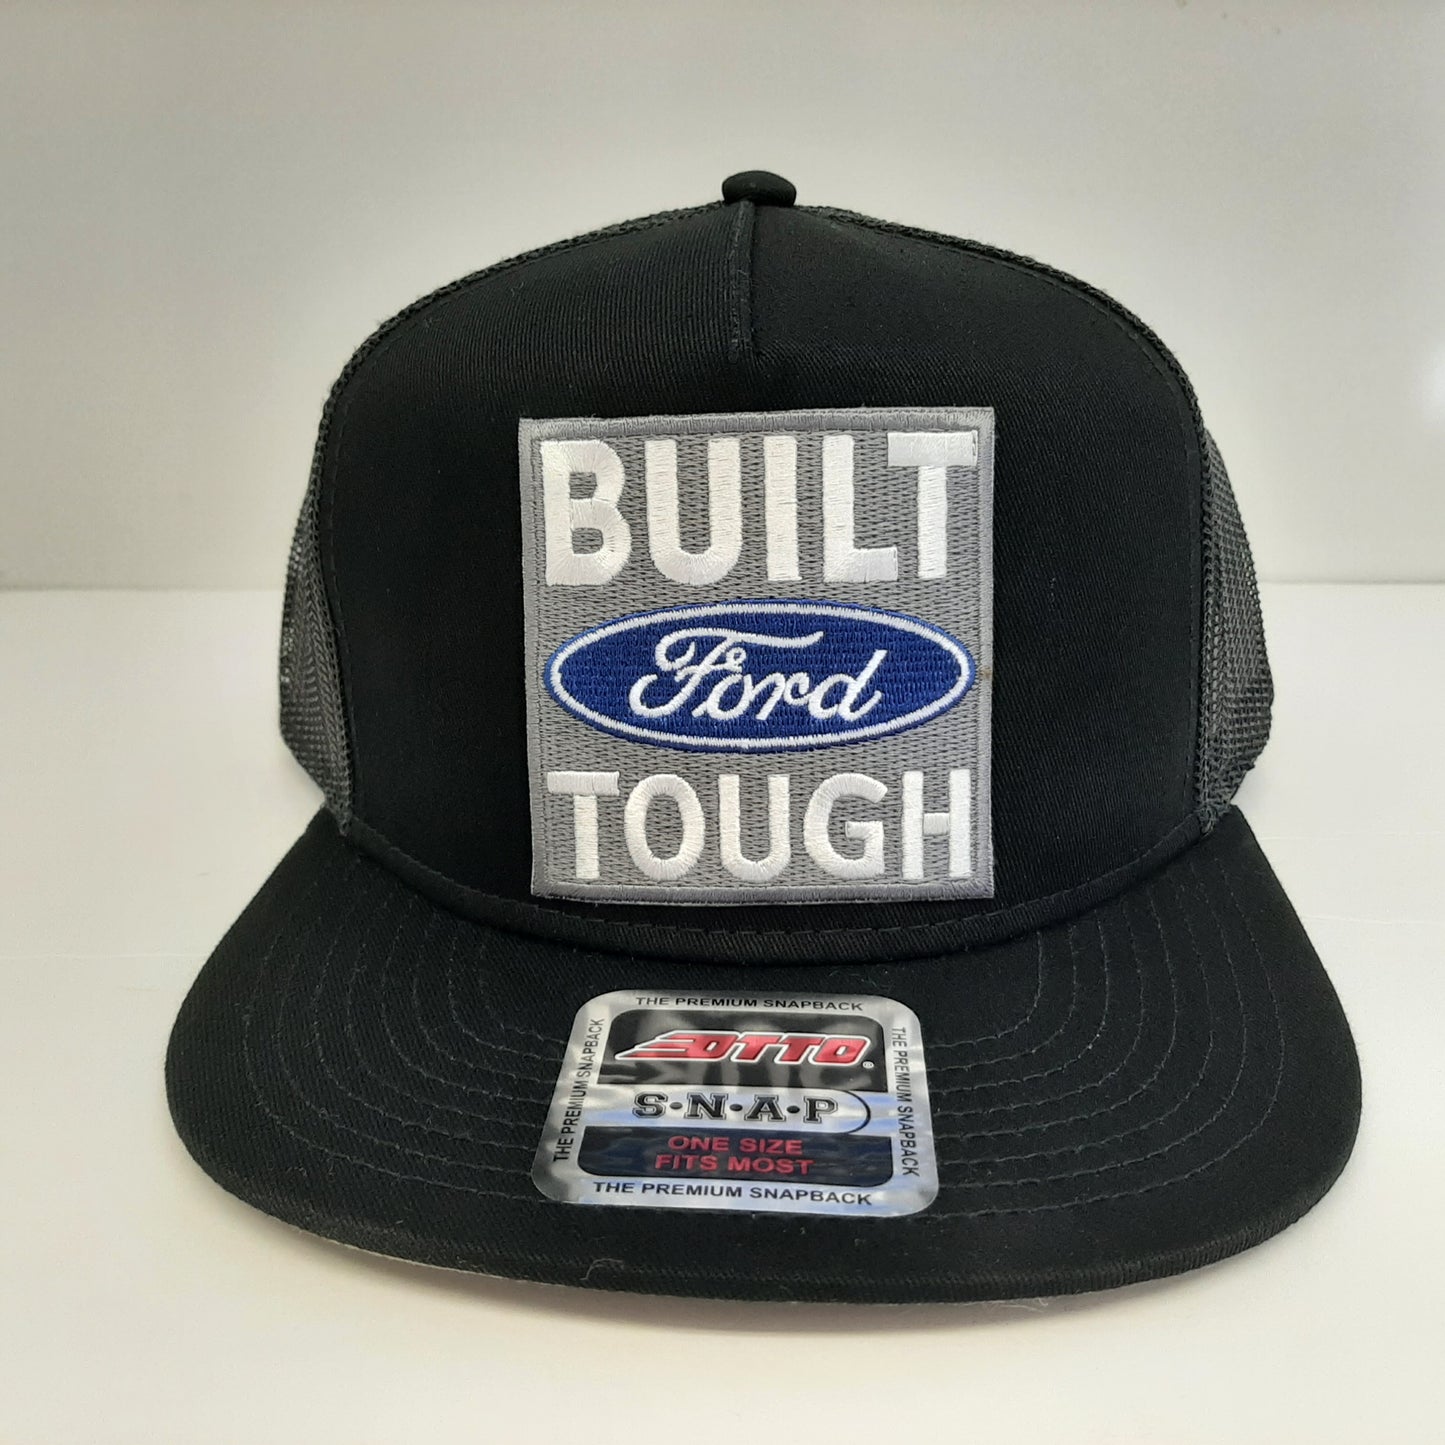 Built Ford Tough Embroidered Patch Flat Bill Snapback Mesh Hat Cap OTTO Black/Black